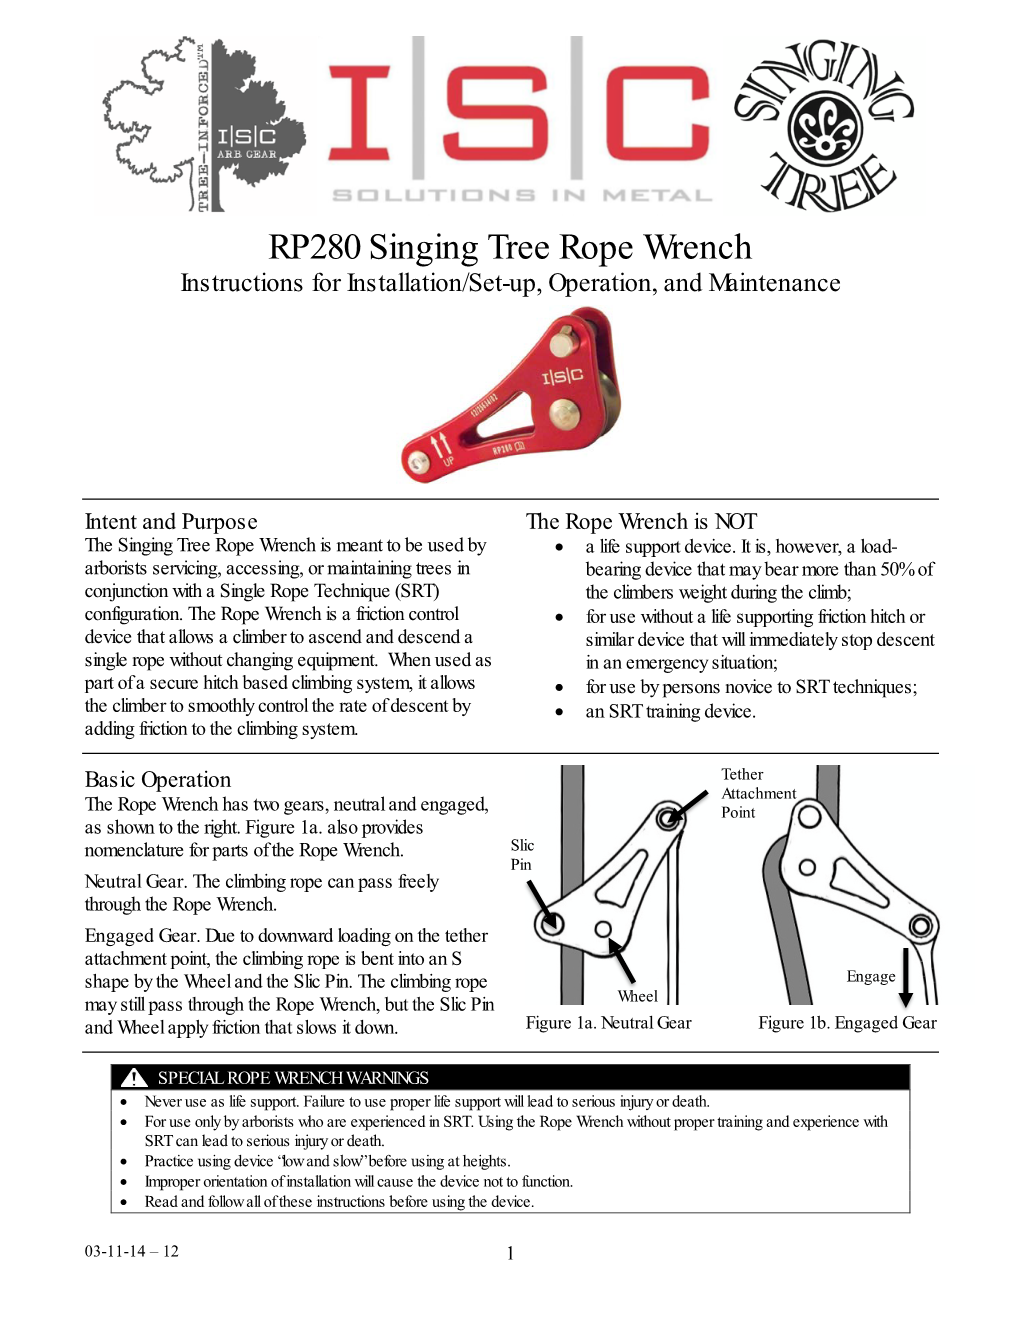 RP280 Singing Tree Rope Wrench Instructions for Installation/Set-Up, Operation, and Maintenance